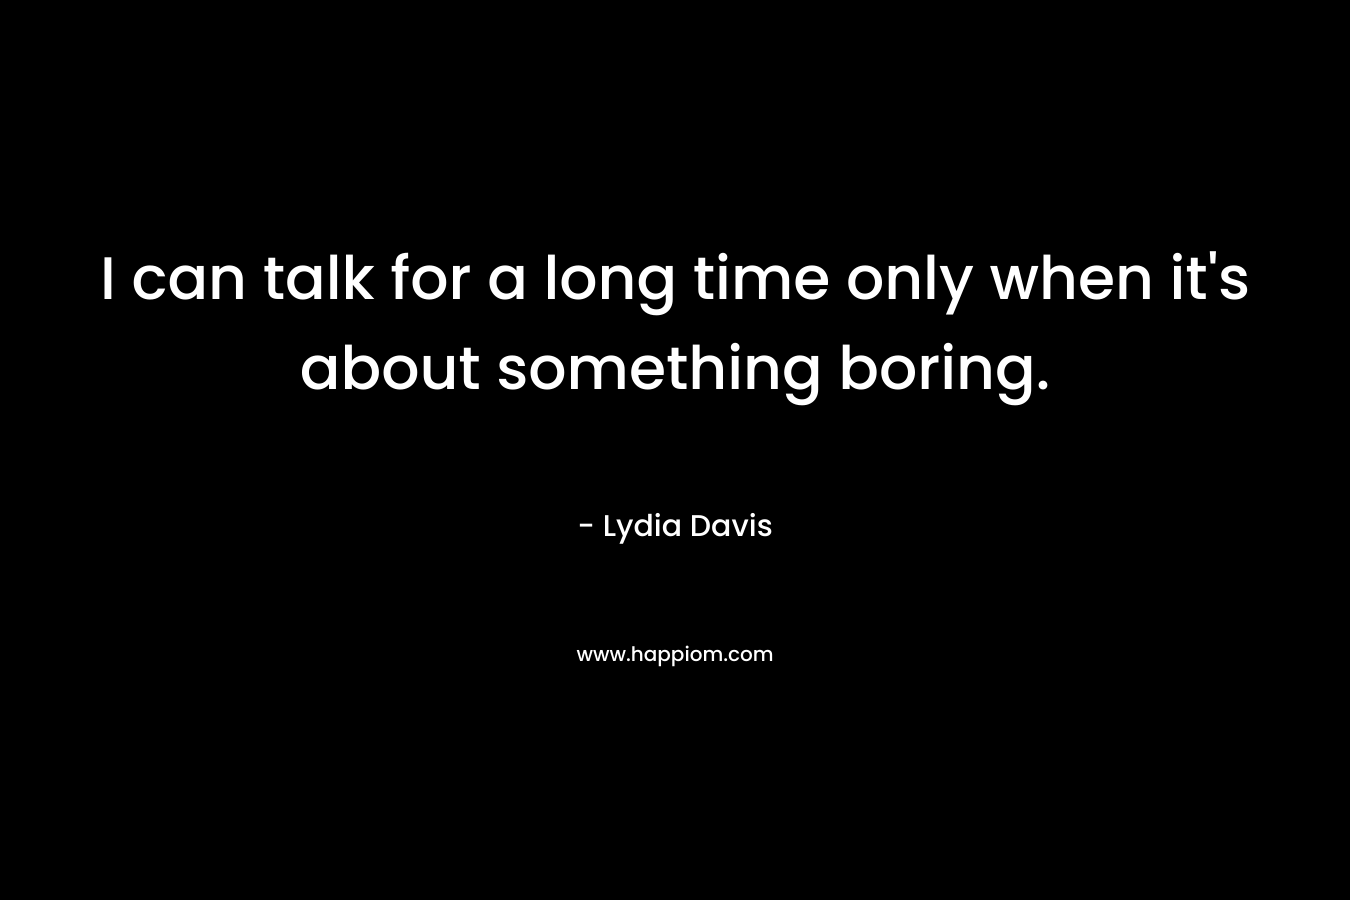 I can talk for a long time only when it's about something boring.